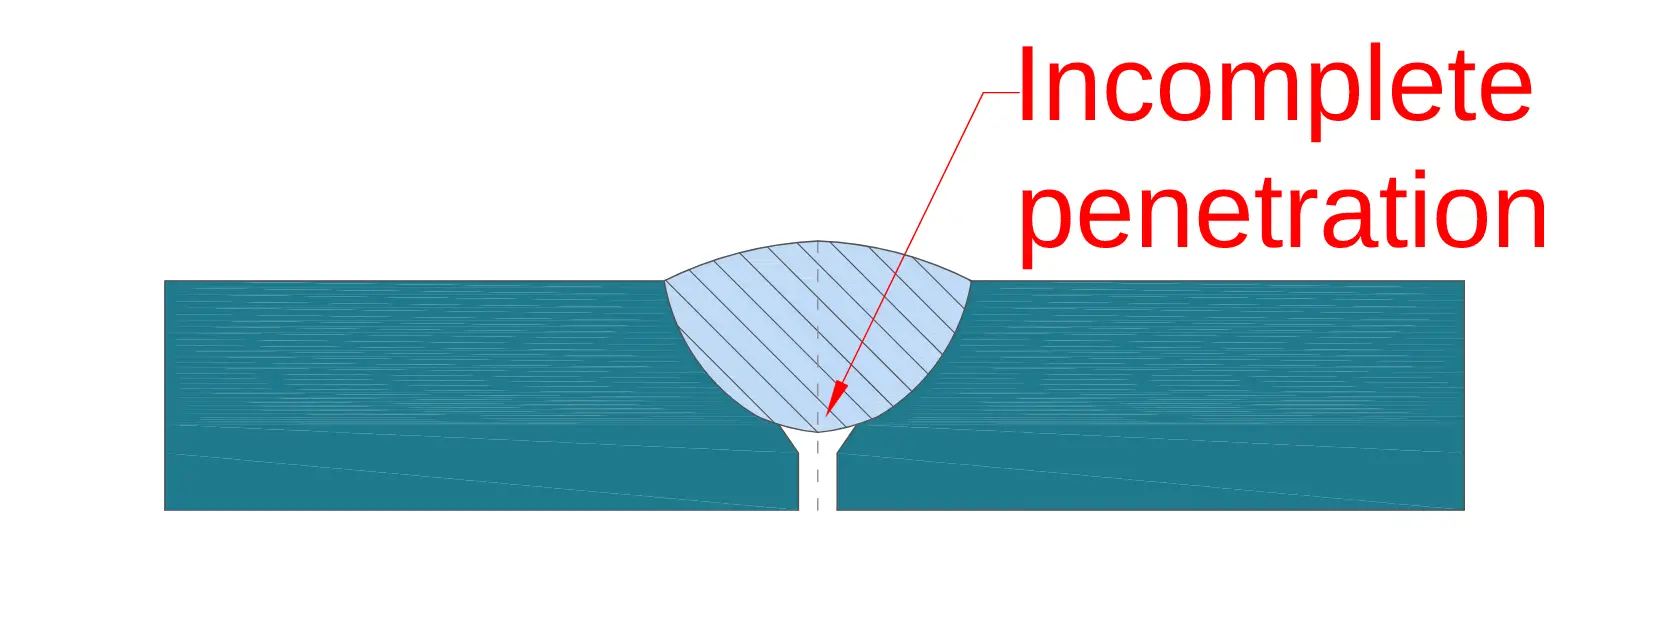 Image of a section that shows incomplete penetration in welding.